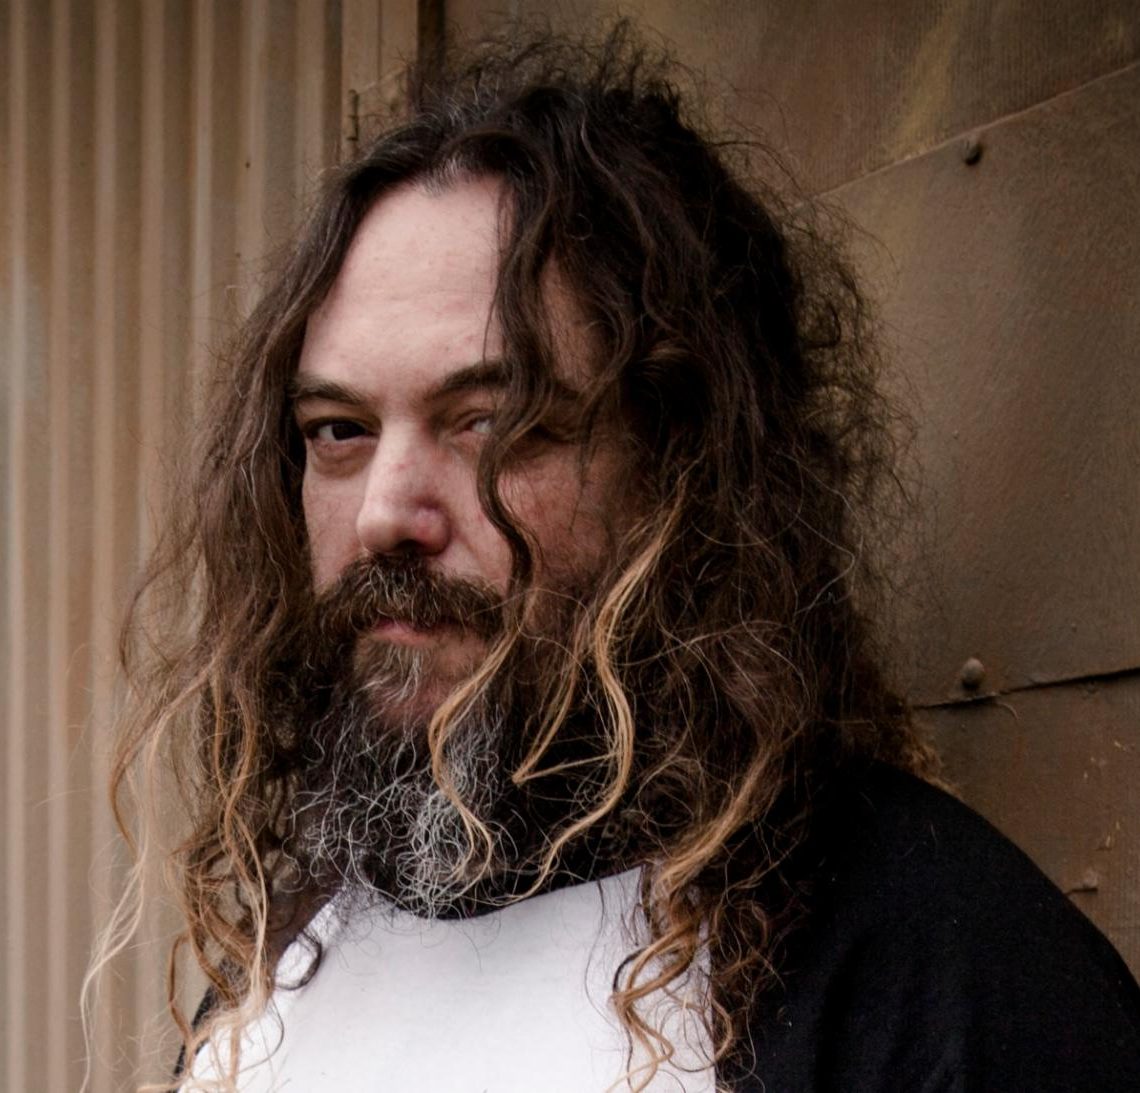 Judge Rules in Favor of Max Cavalera in Ongoing Libel Case